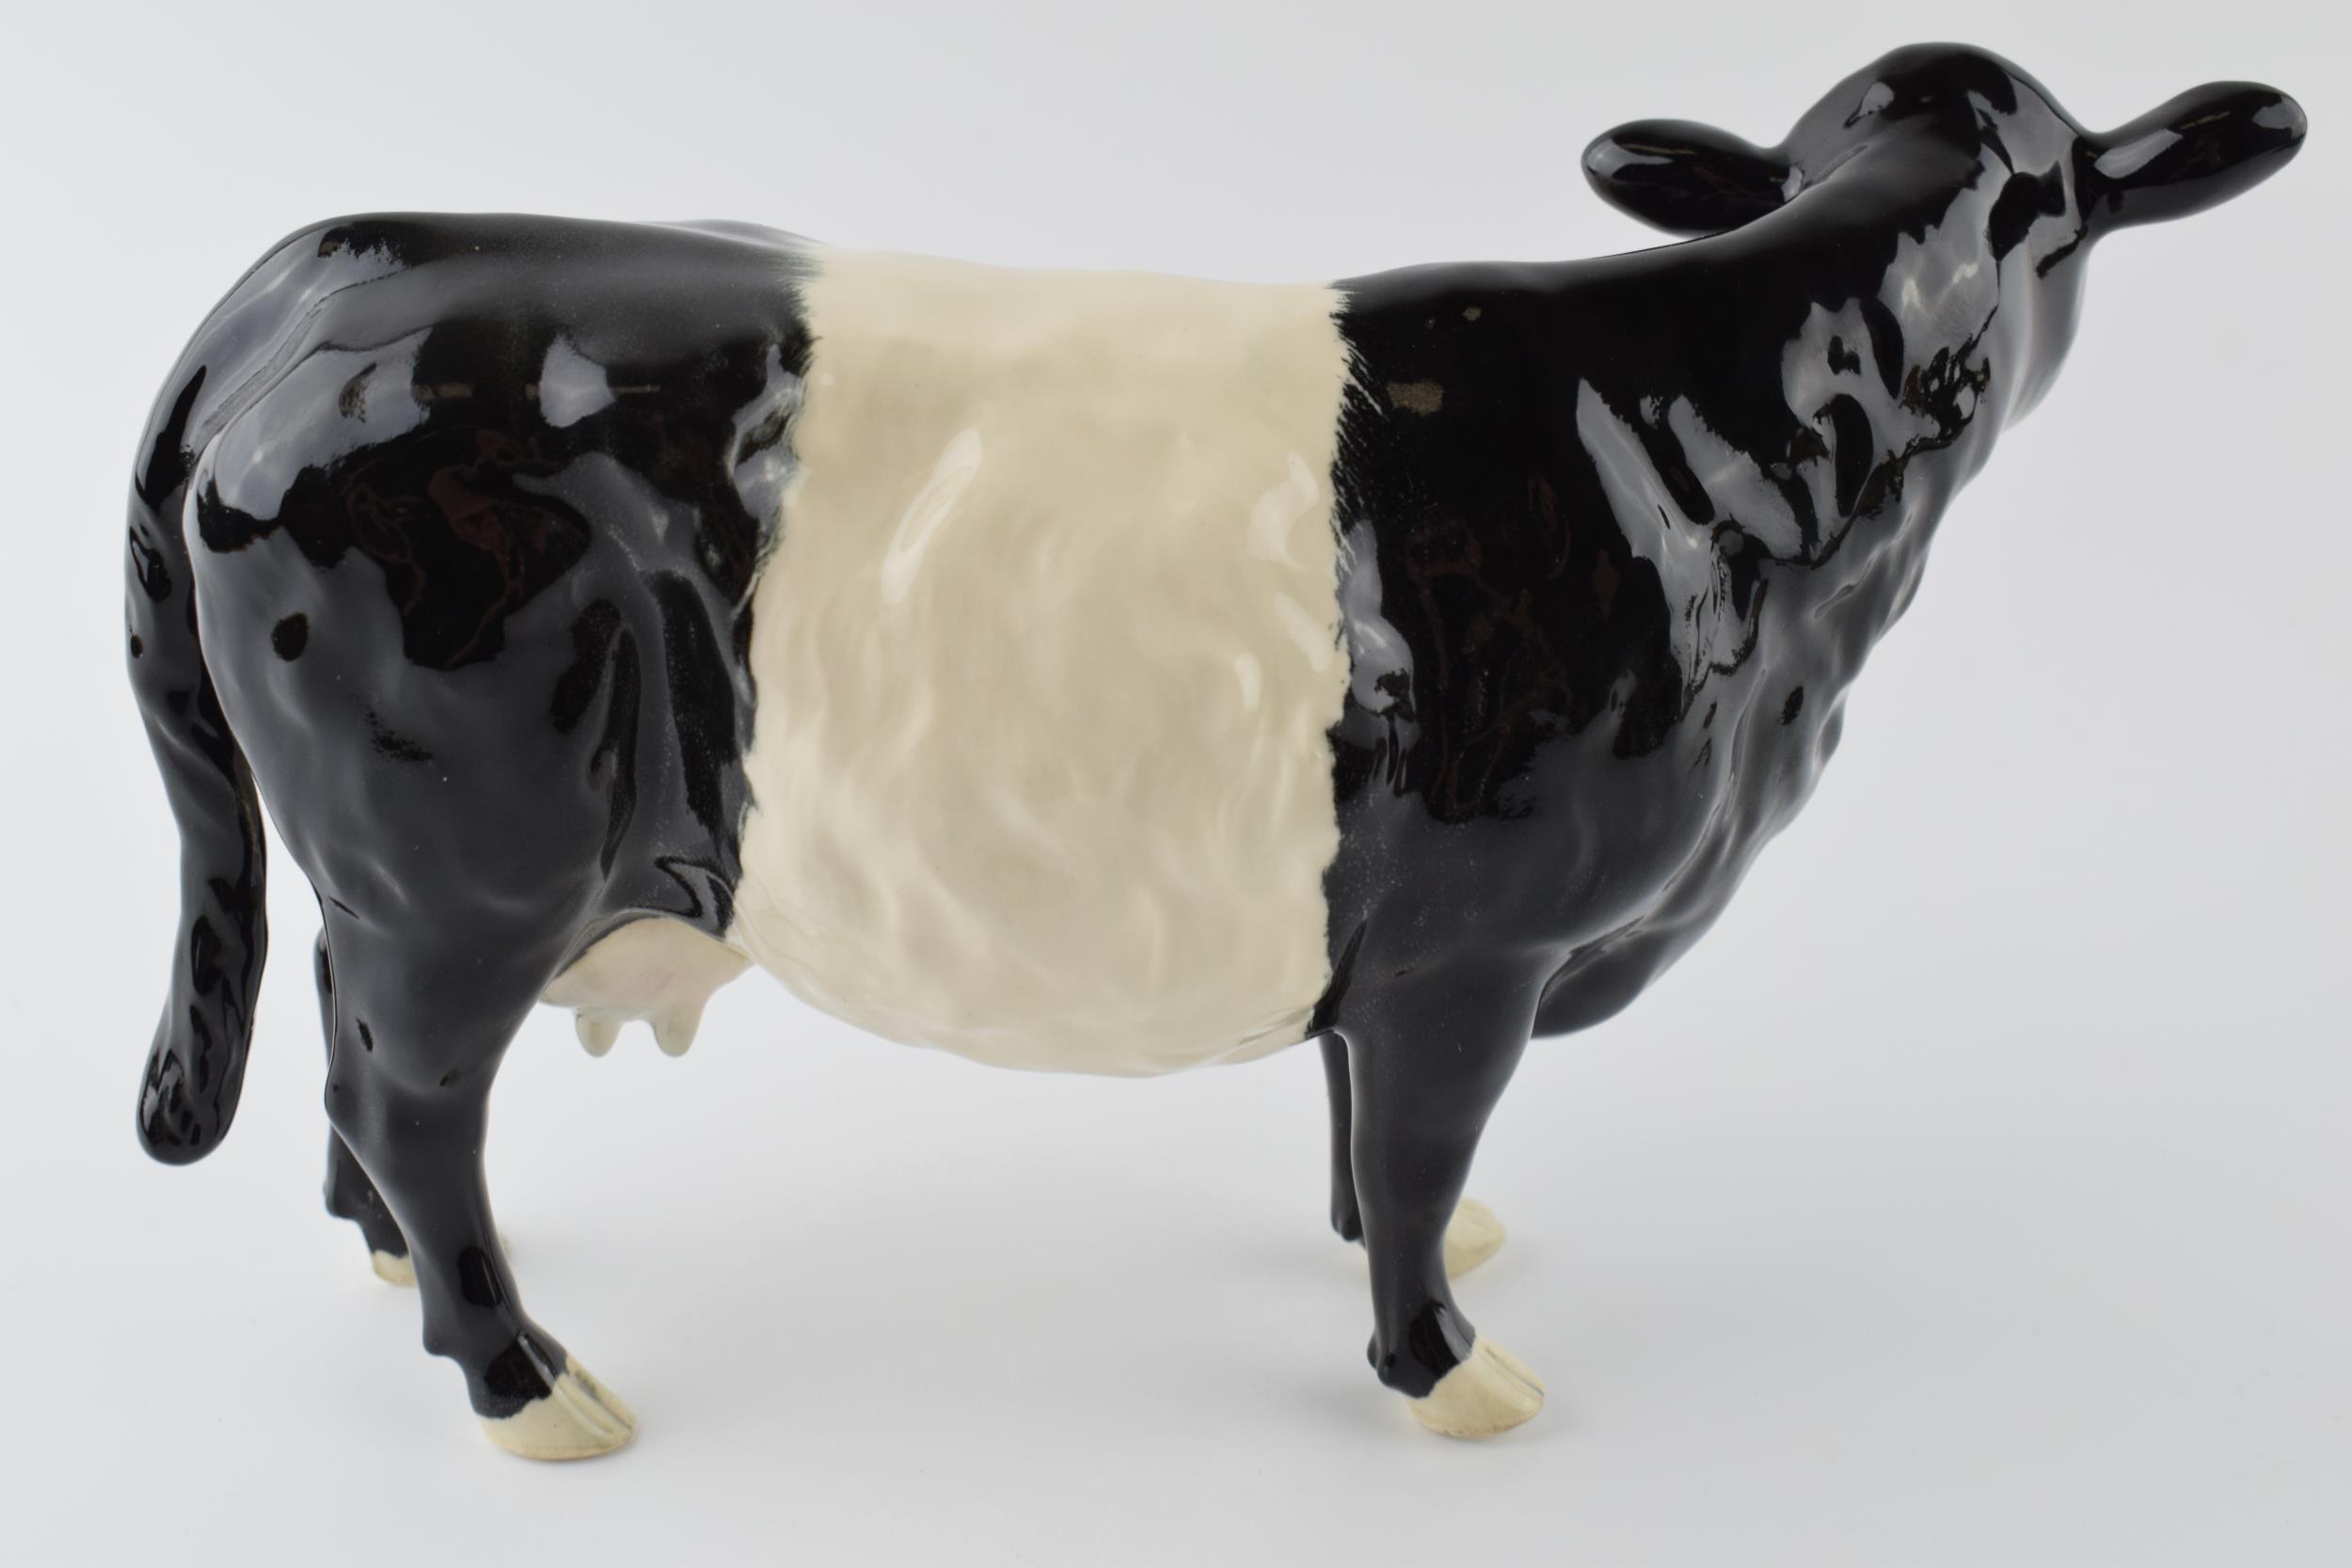 Beswick Belted Galloway Cow 4113A. In good condition with no obvious damage or restoration. - Image 2 of 3